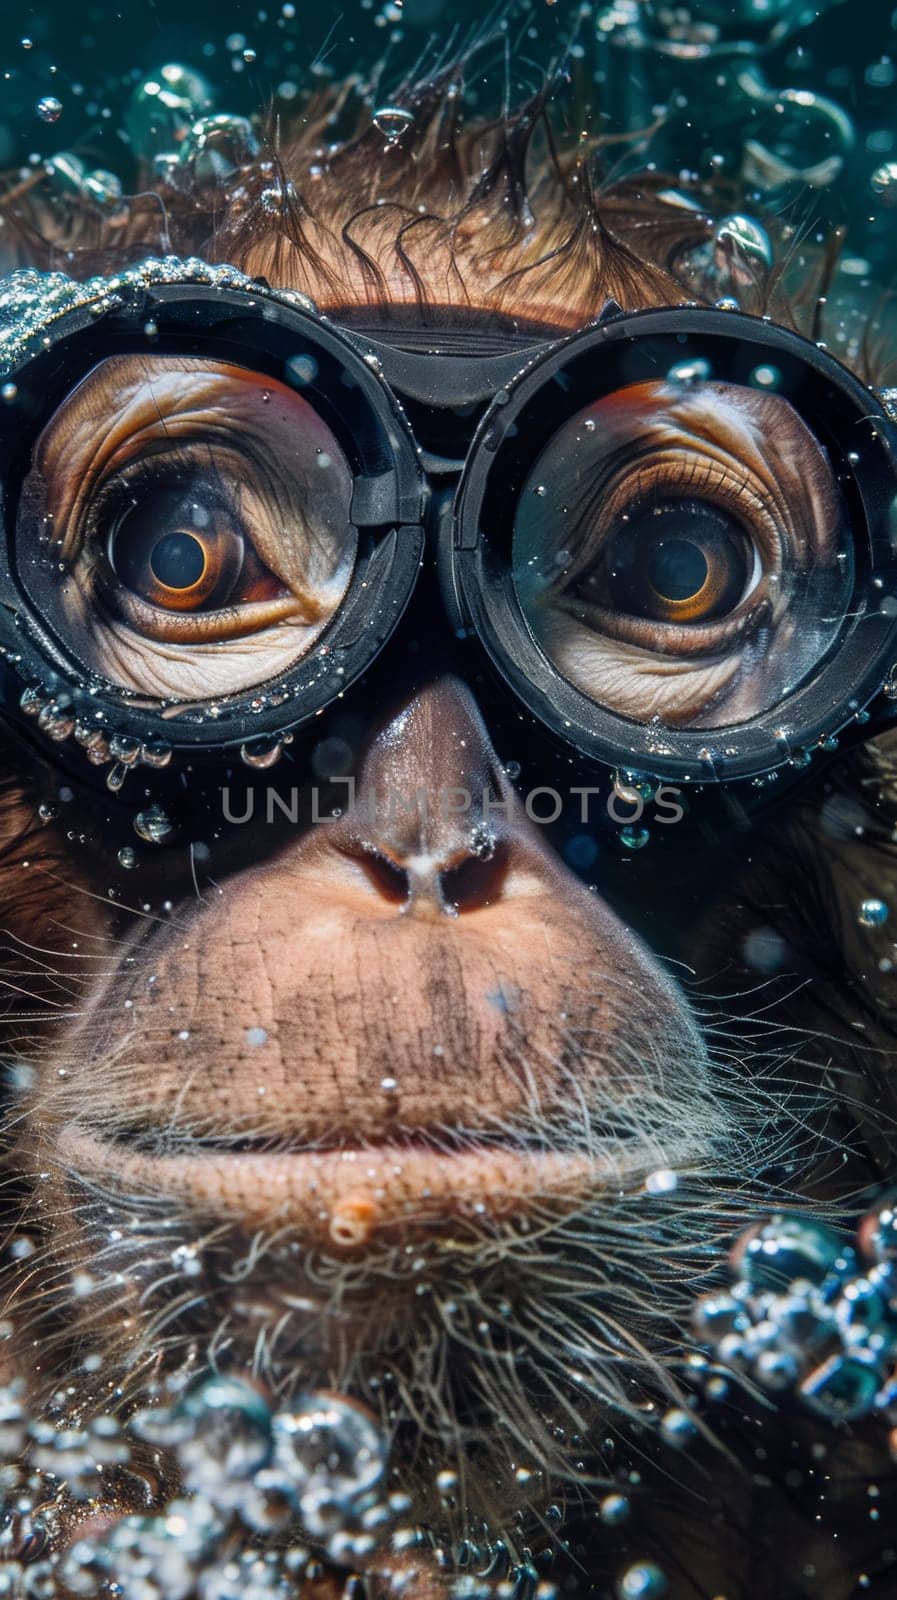 A monkey wearing goggles and swimming in the water